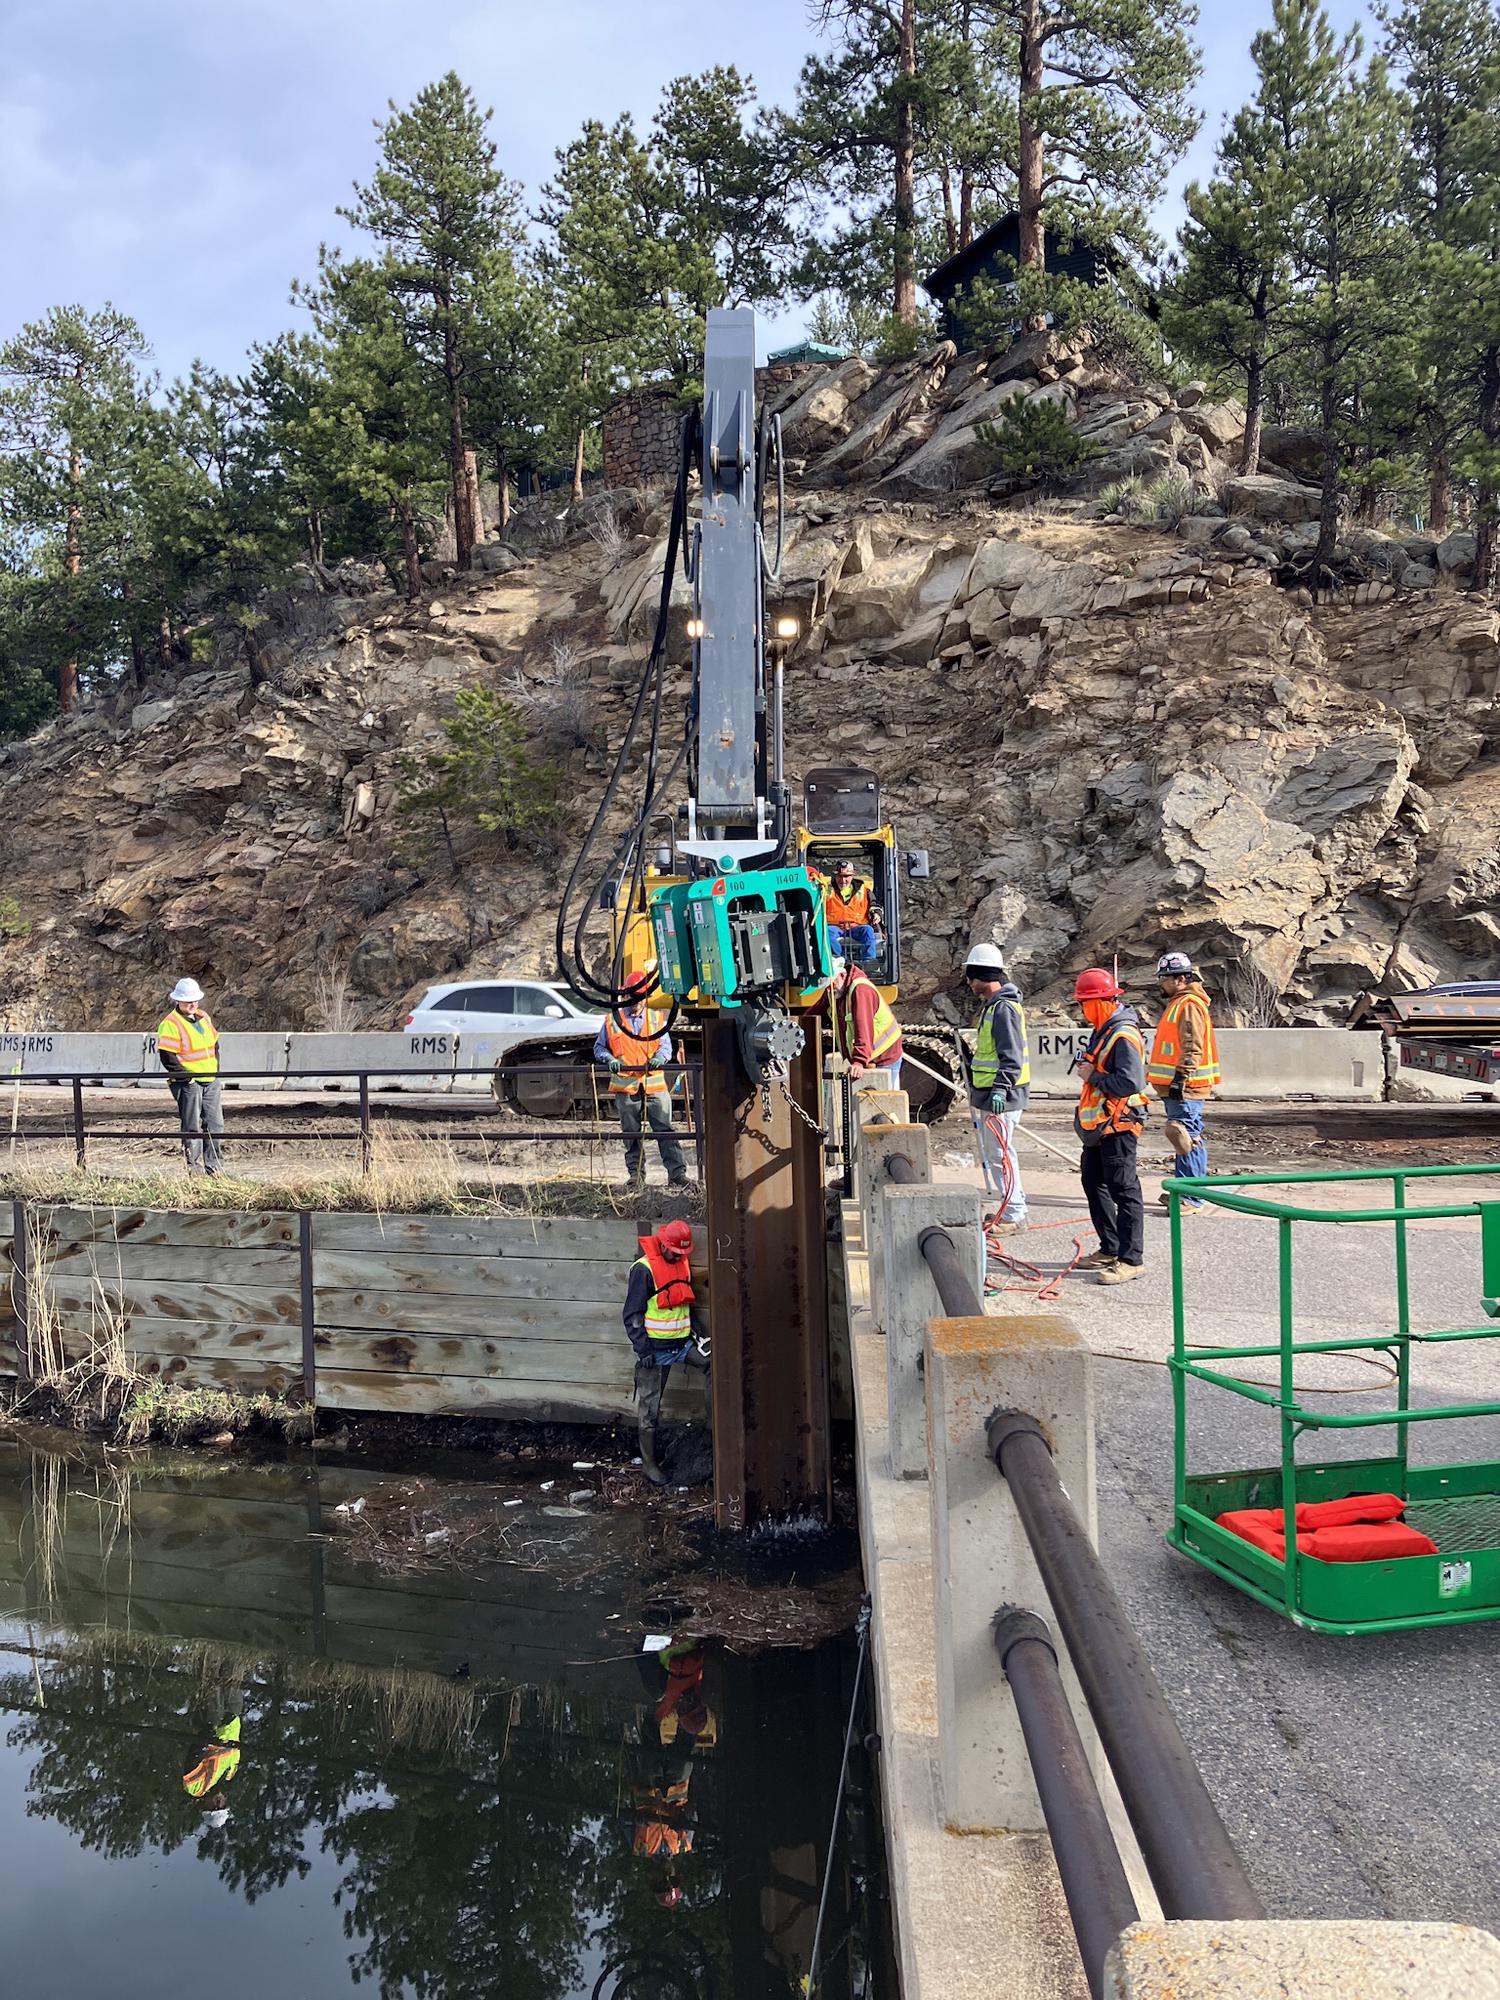 Sheet pile driving to stabilize the foundation of the improved roadway. Joseph Zink detail image